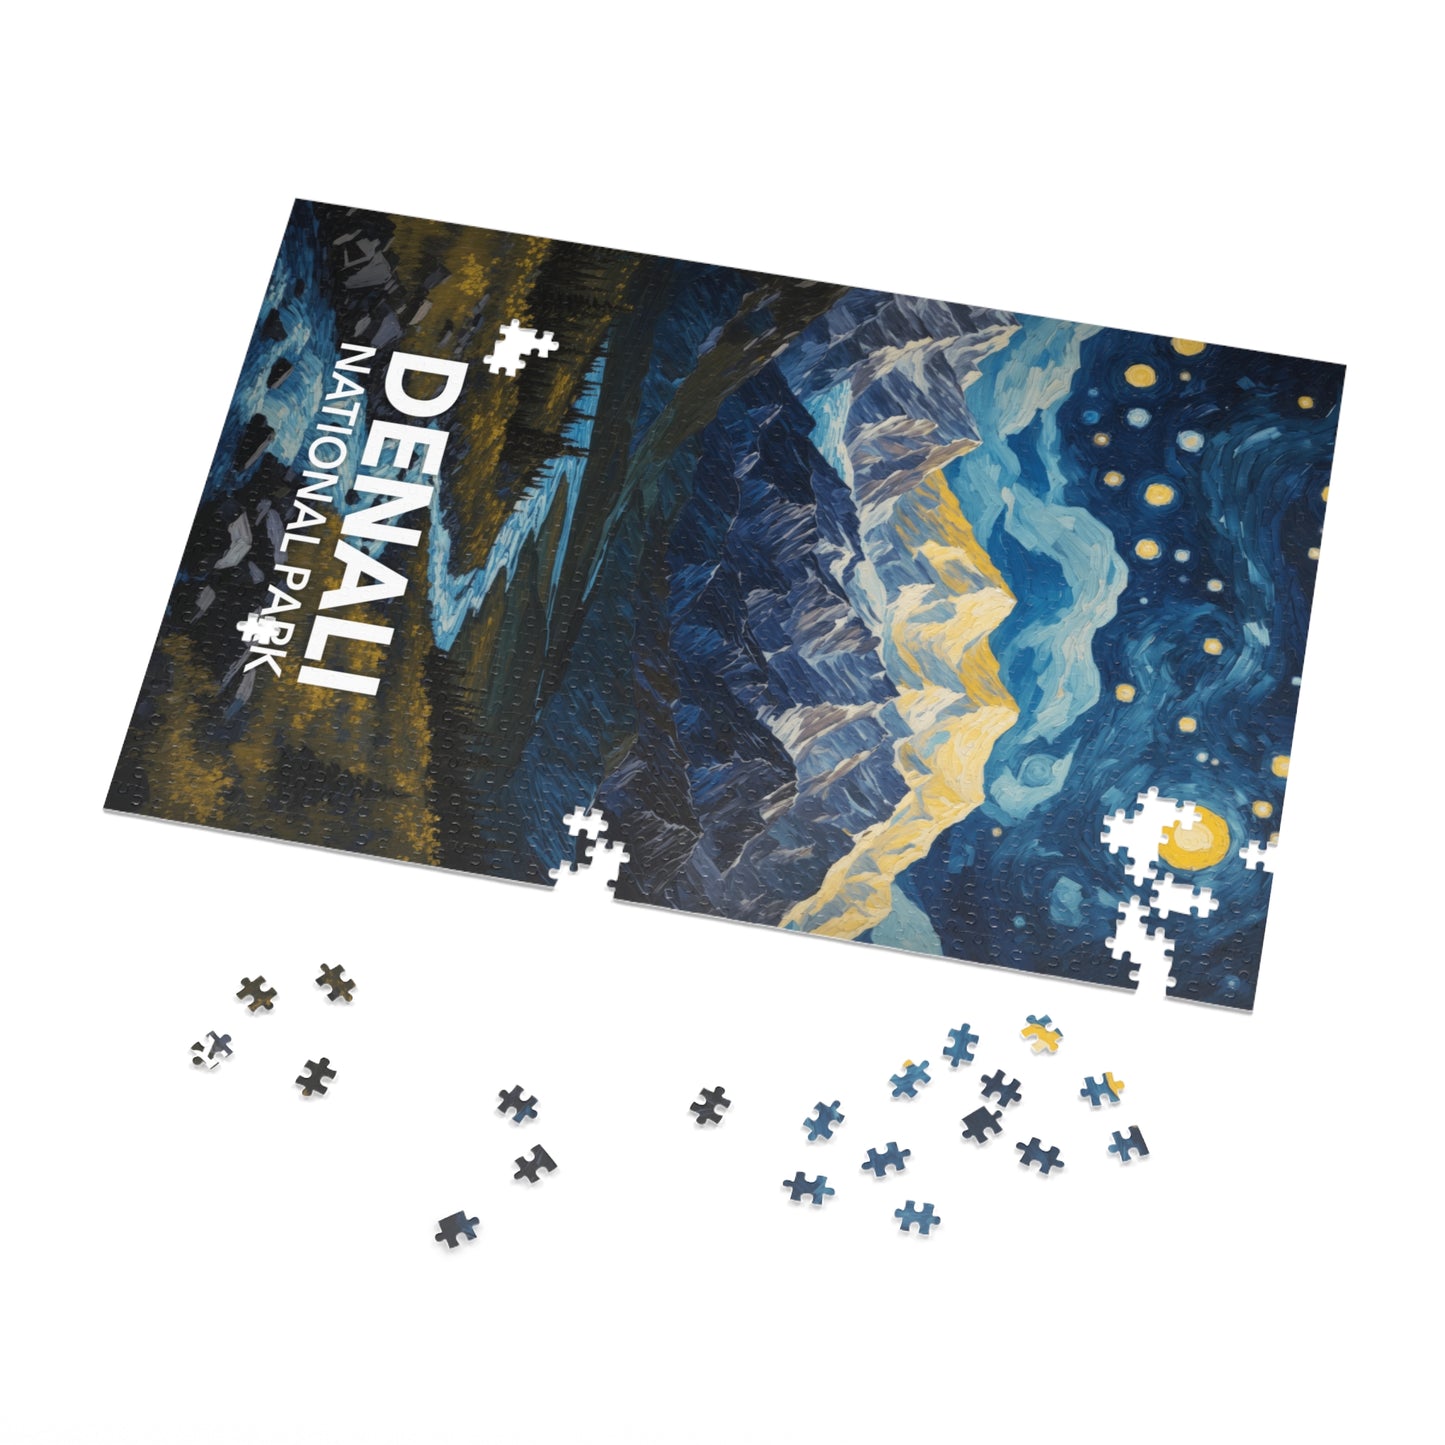 Denali National Park Jigsaw Puzzle - The Starry Night